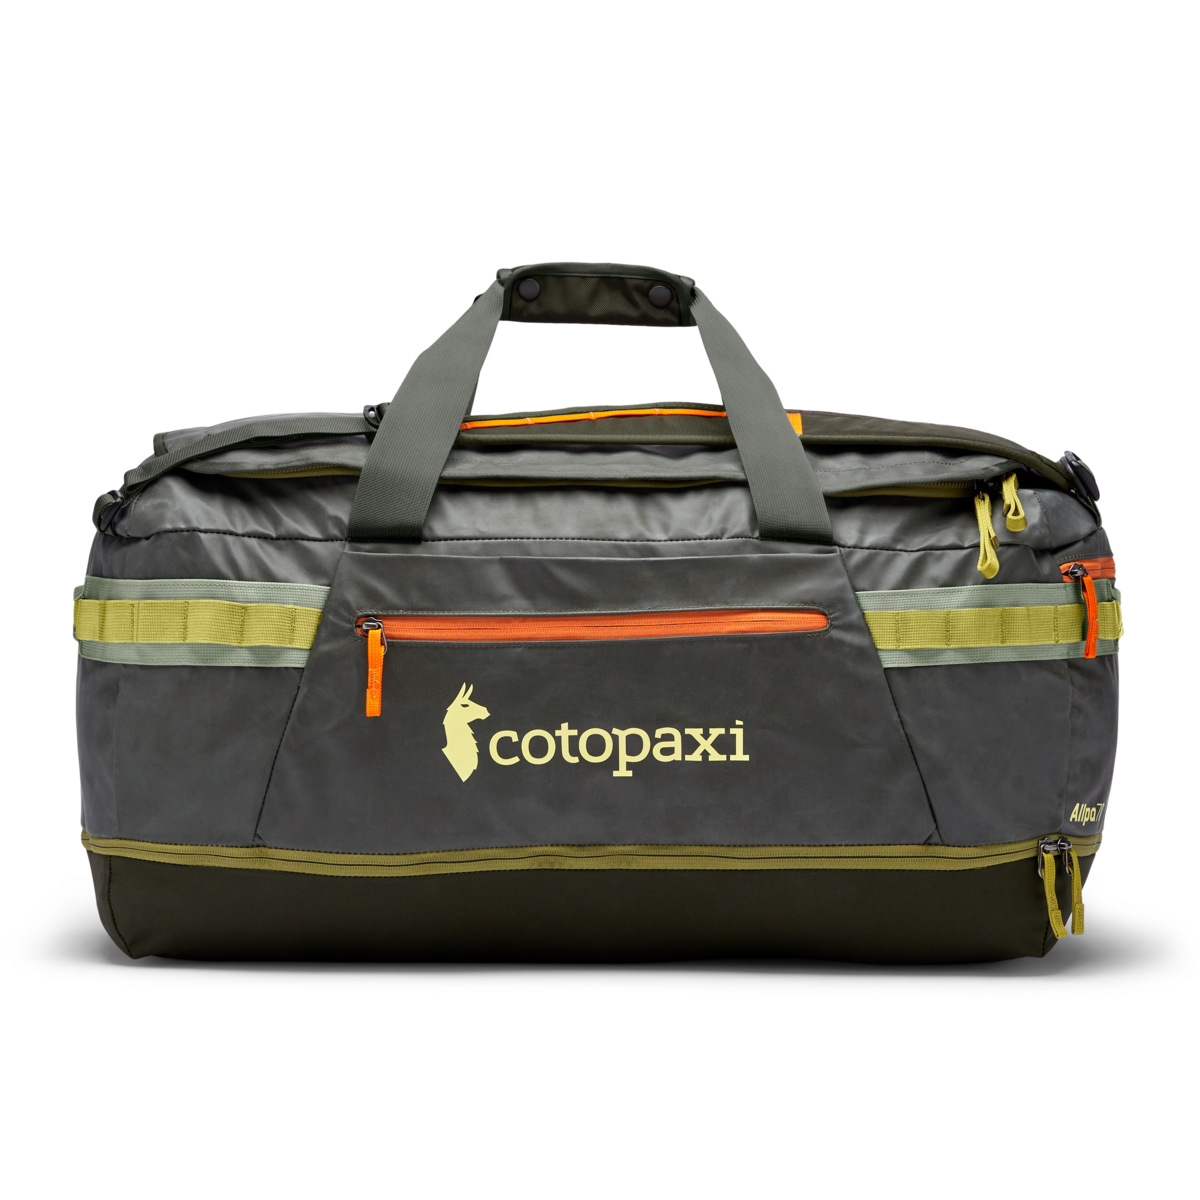 Woods Expedition Cargo Bag, Outdoor Weekender/Overnight Travel Duffle Bag